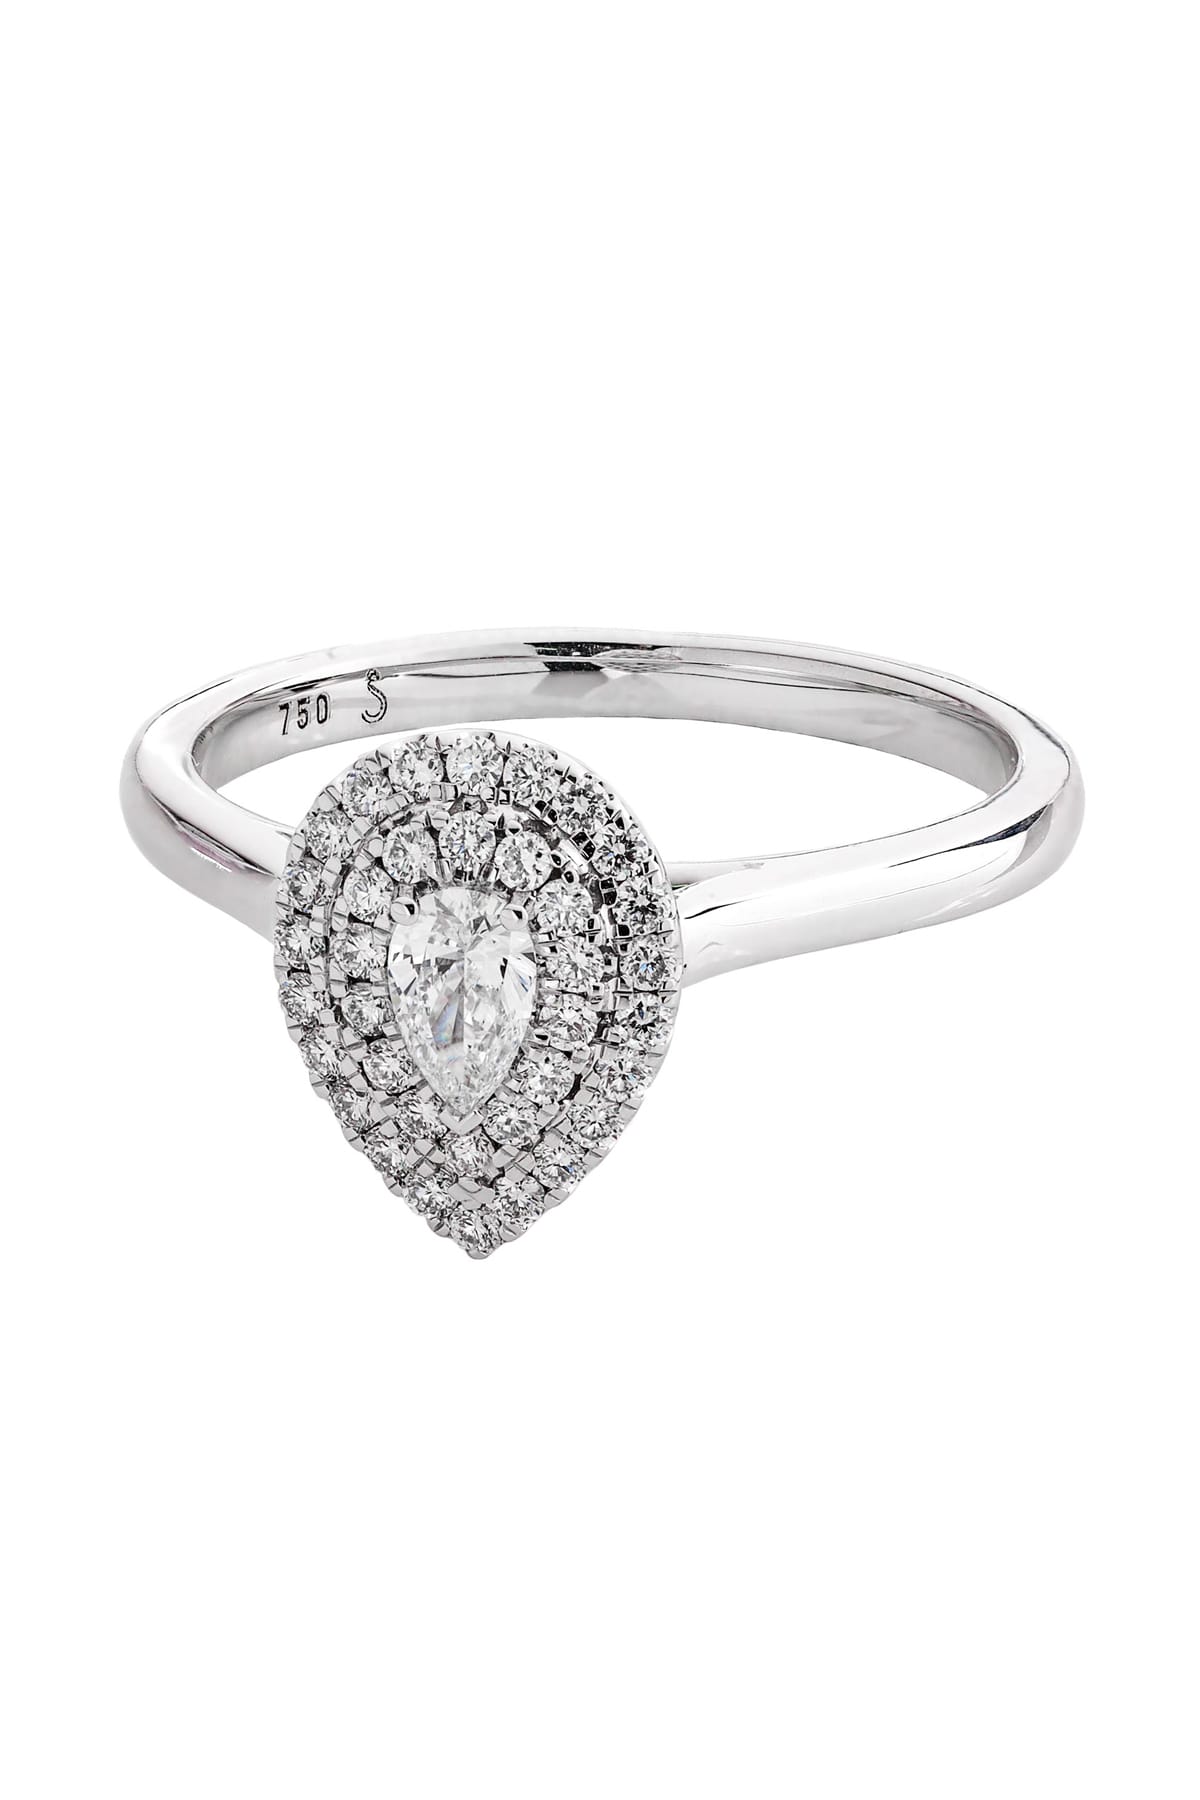 18ct Gold Double Pear Diamond Halo Engagement Ring available at LeGassick Diamonds and Jewellery Gold Coast, Australia